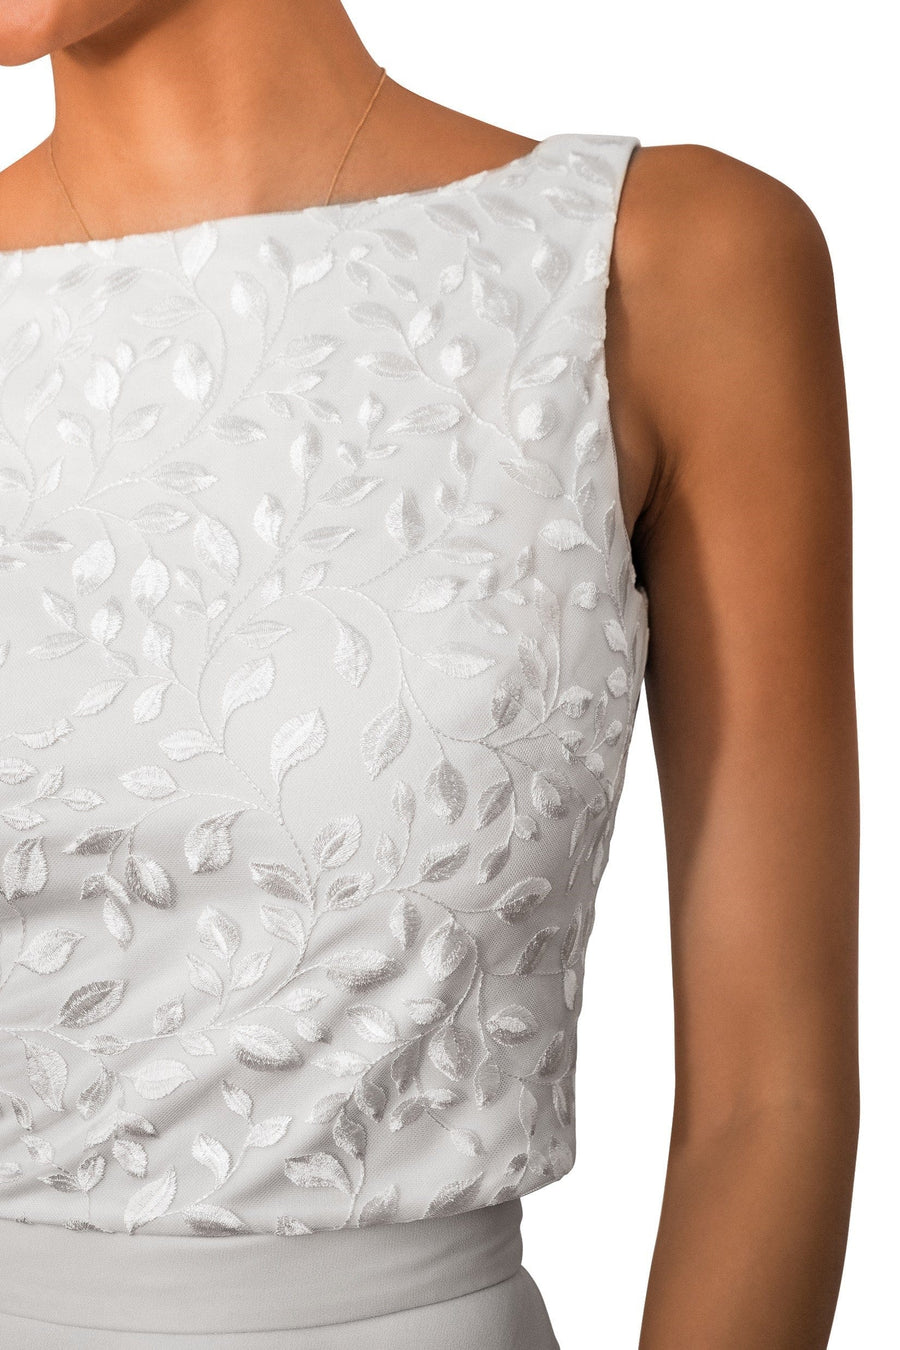 Star Night Bridal Couture 0405 Top